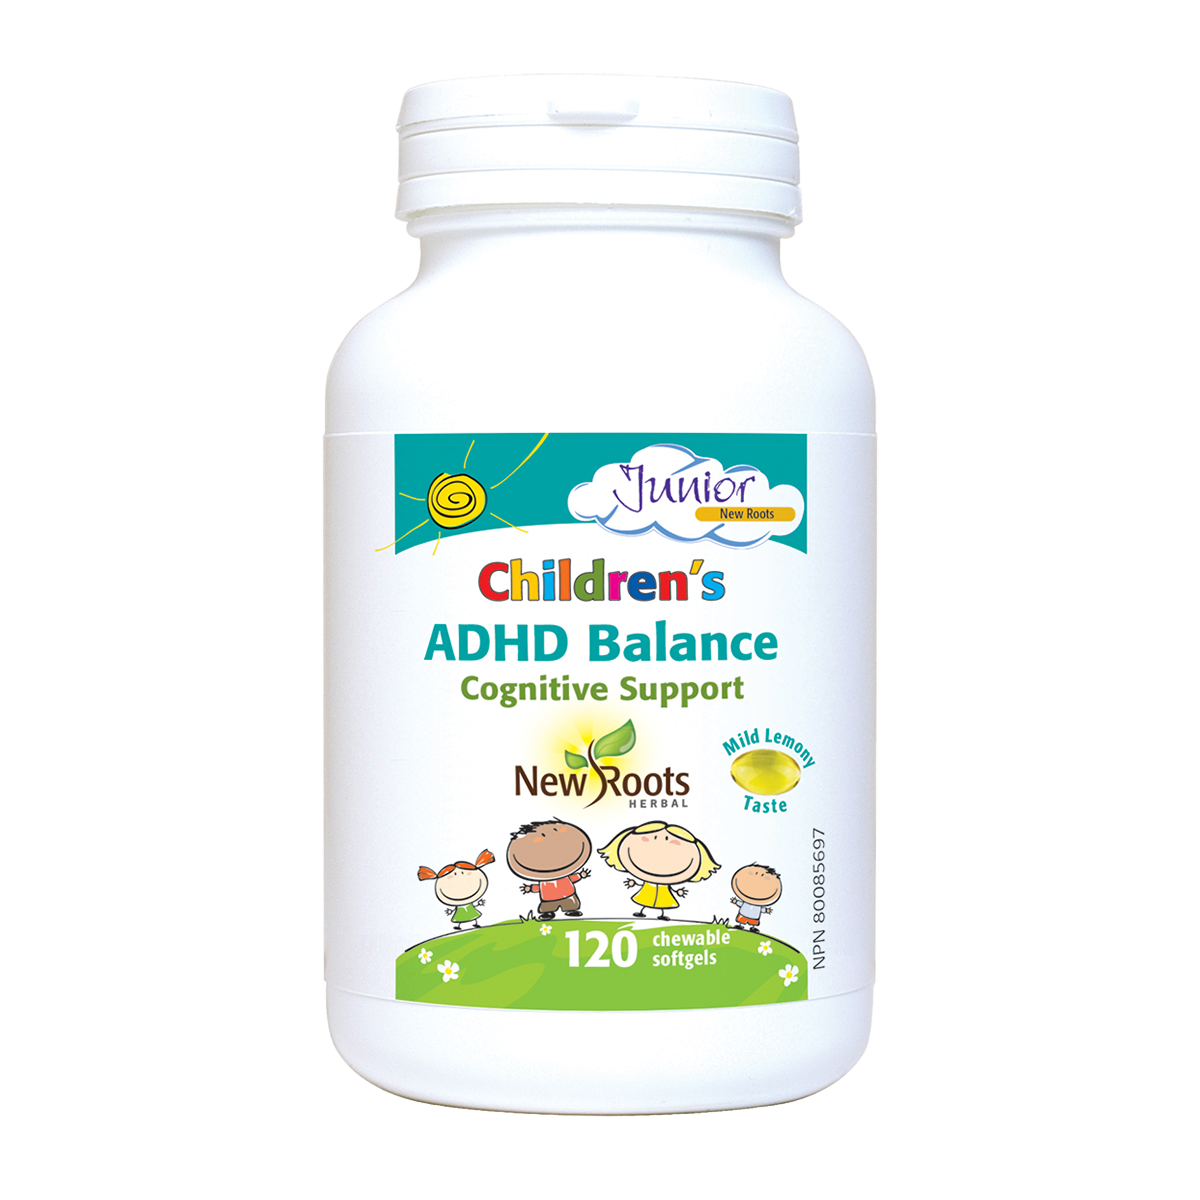 New Roots Children's ADHD Balance 120 Chewable Tablets